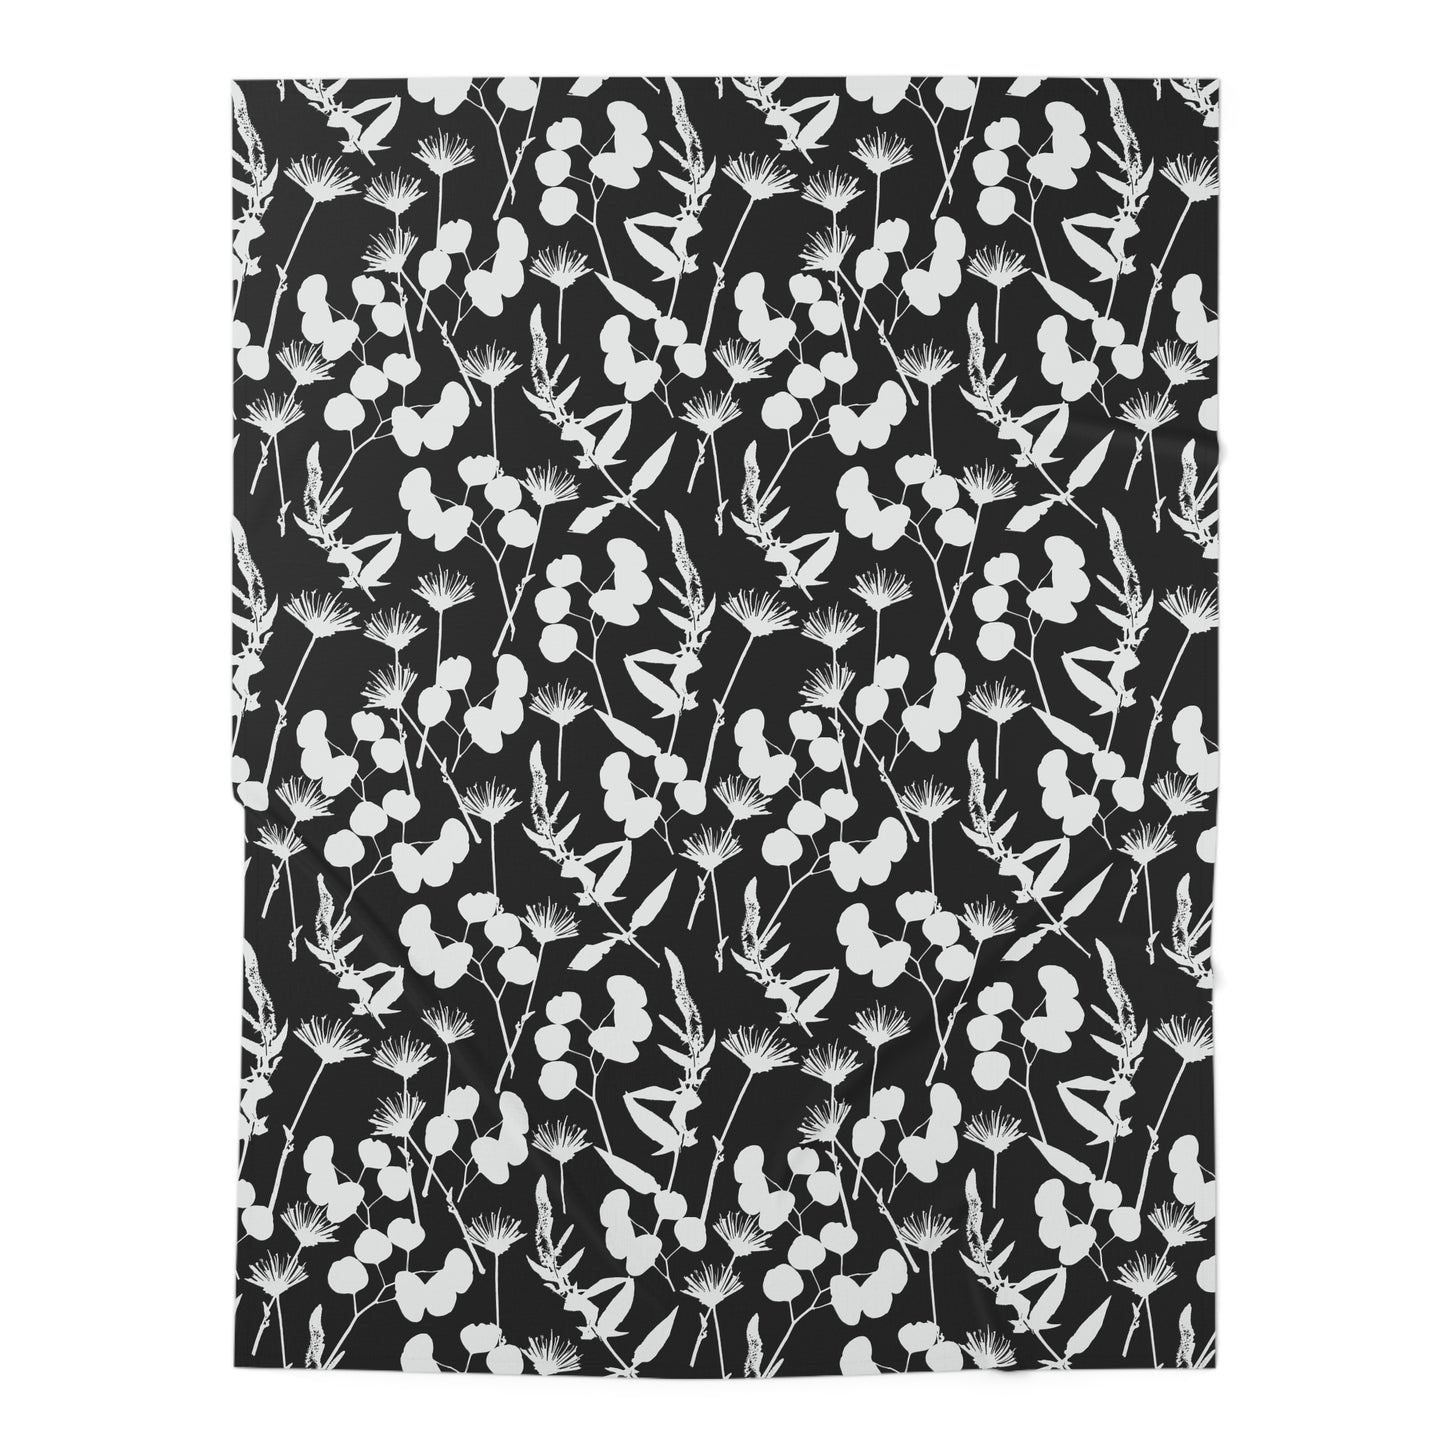 Black and White Floral Baby Swaddle Blanket